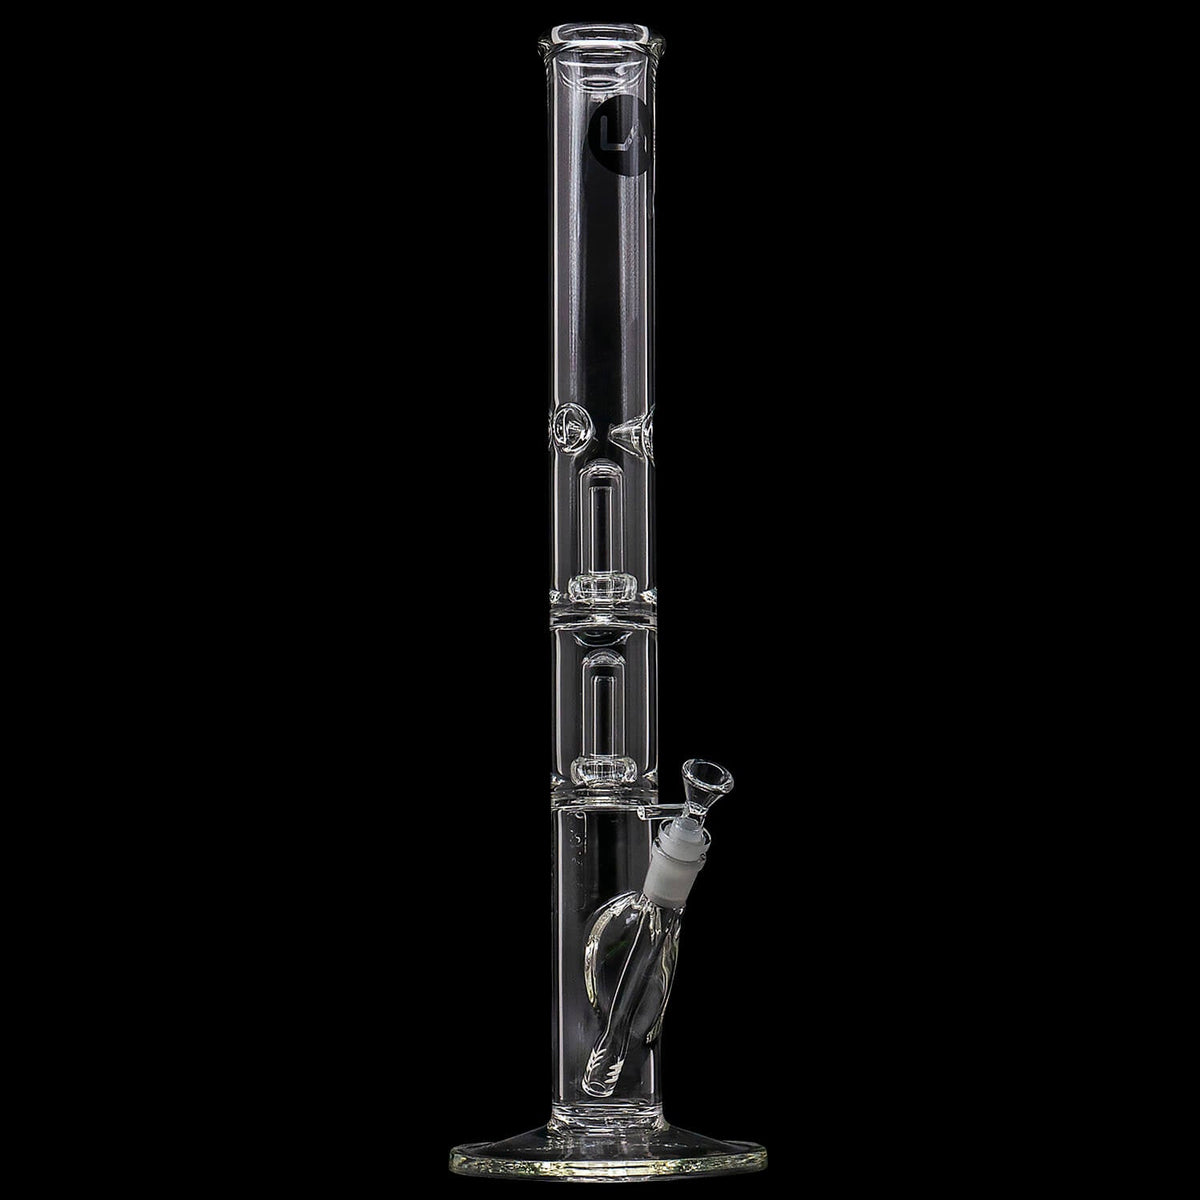 LA Pipes Thick Glass Straight Showerhead Perc Water-Pipe